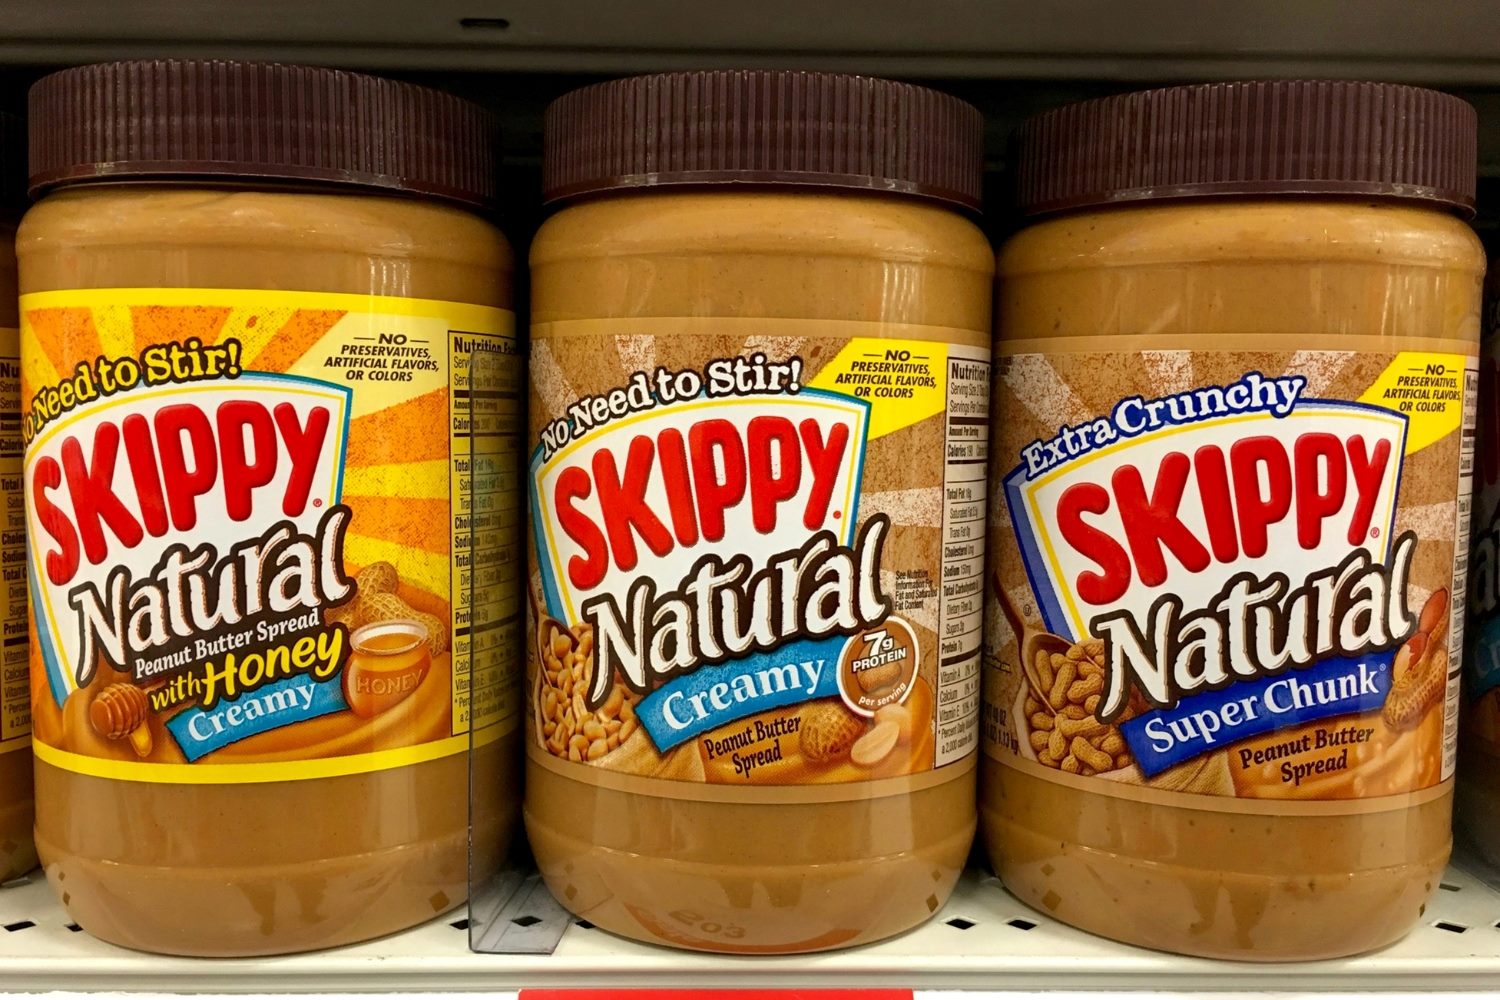 19-skippy-natural-peanut-butter-nutrition-facts